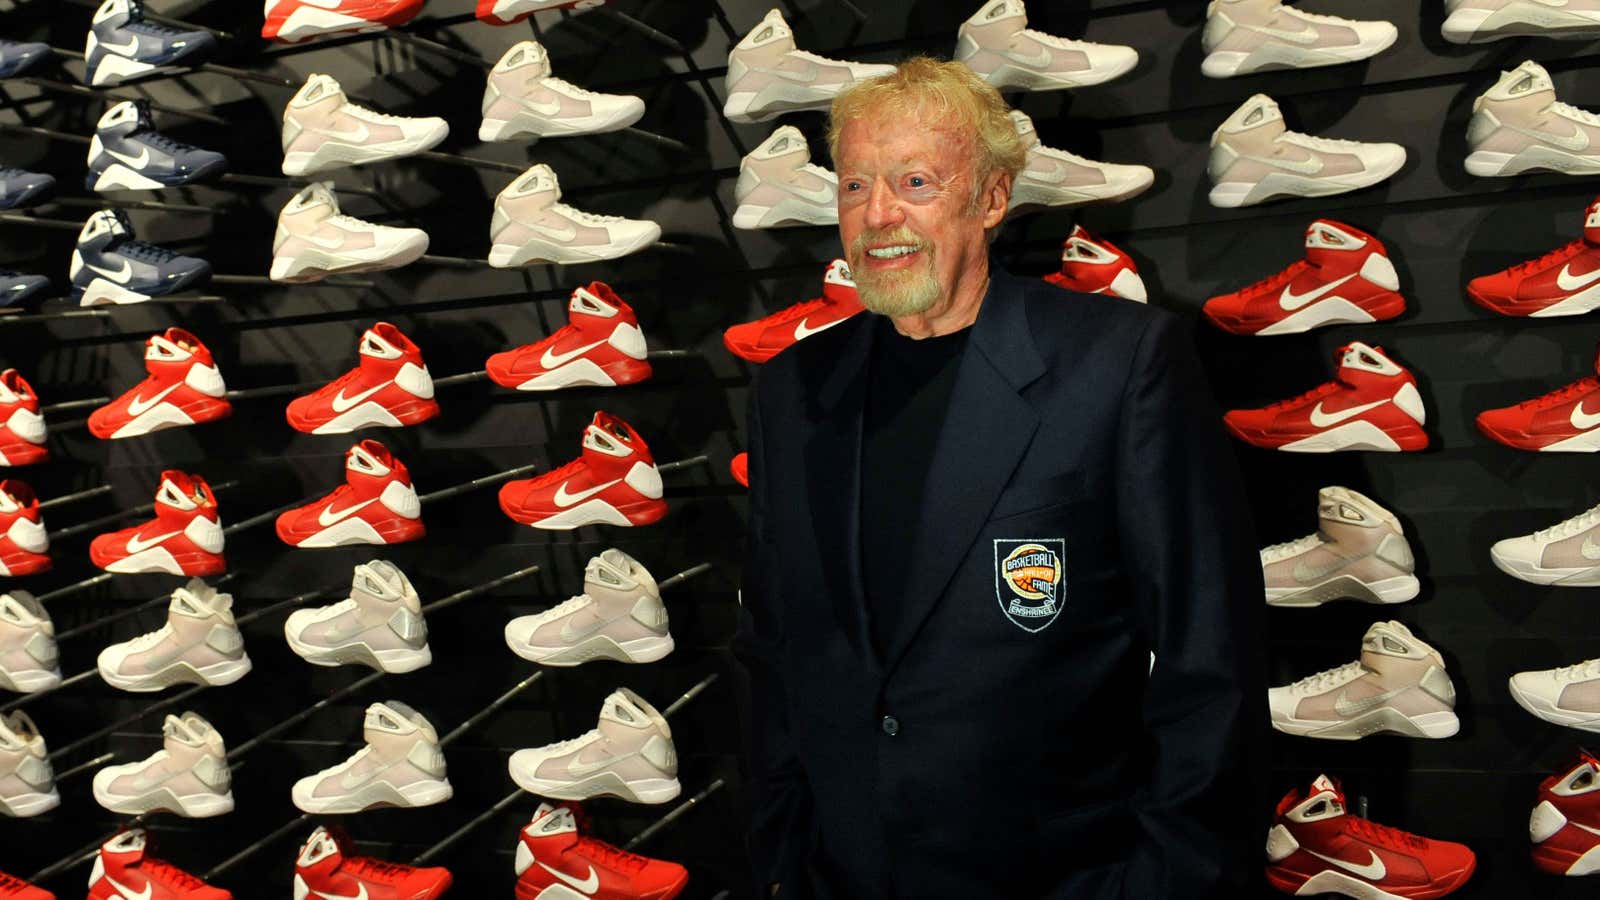 Mega-donor and Nike founder Phil Knight, circa 2012.